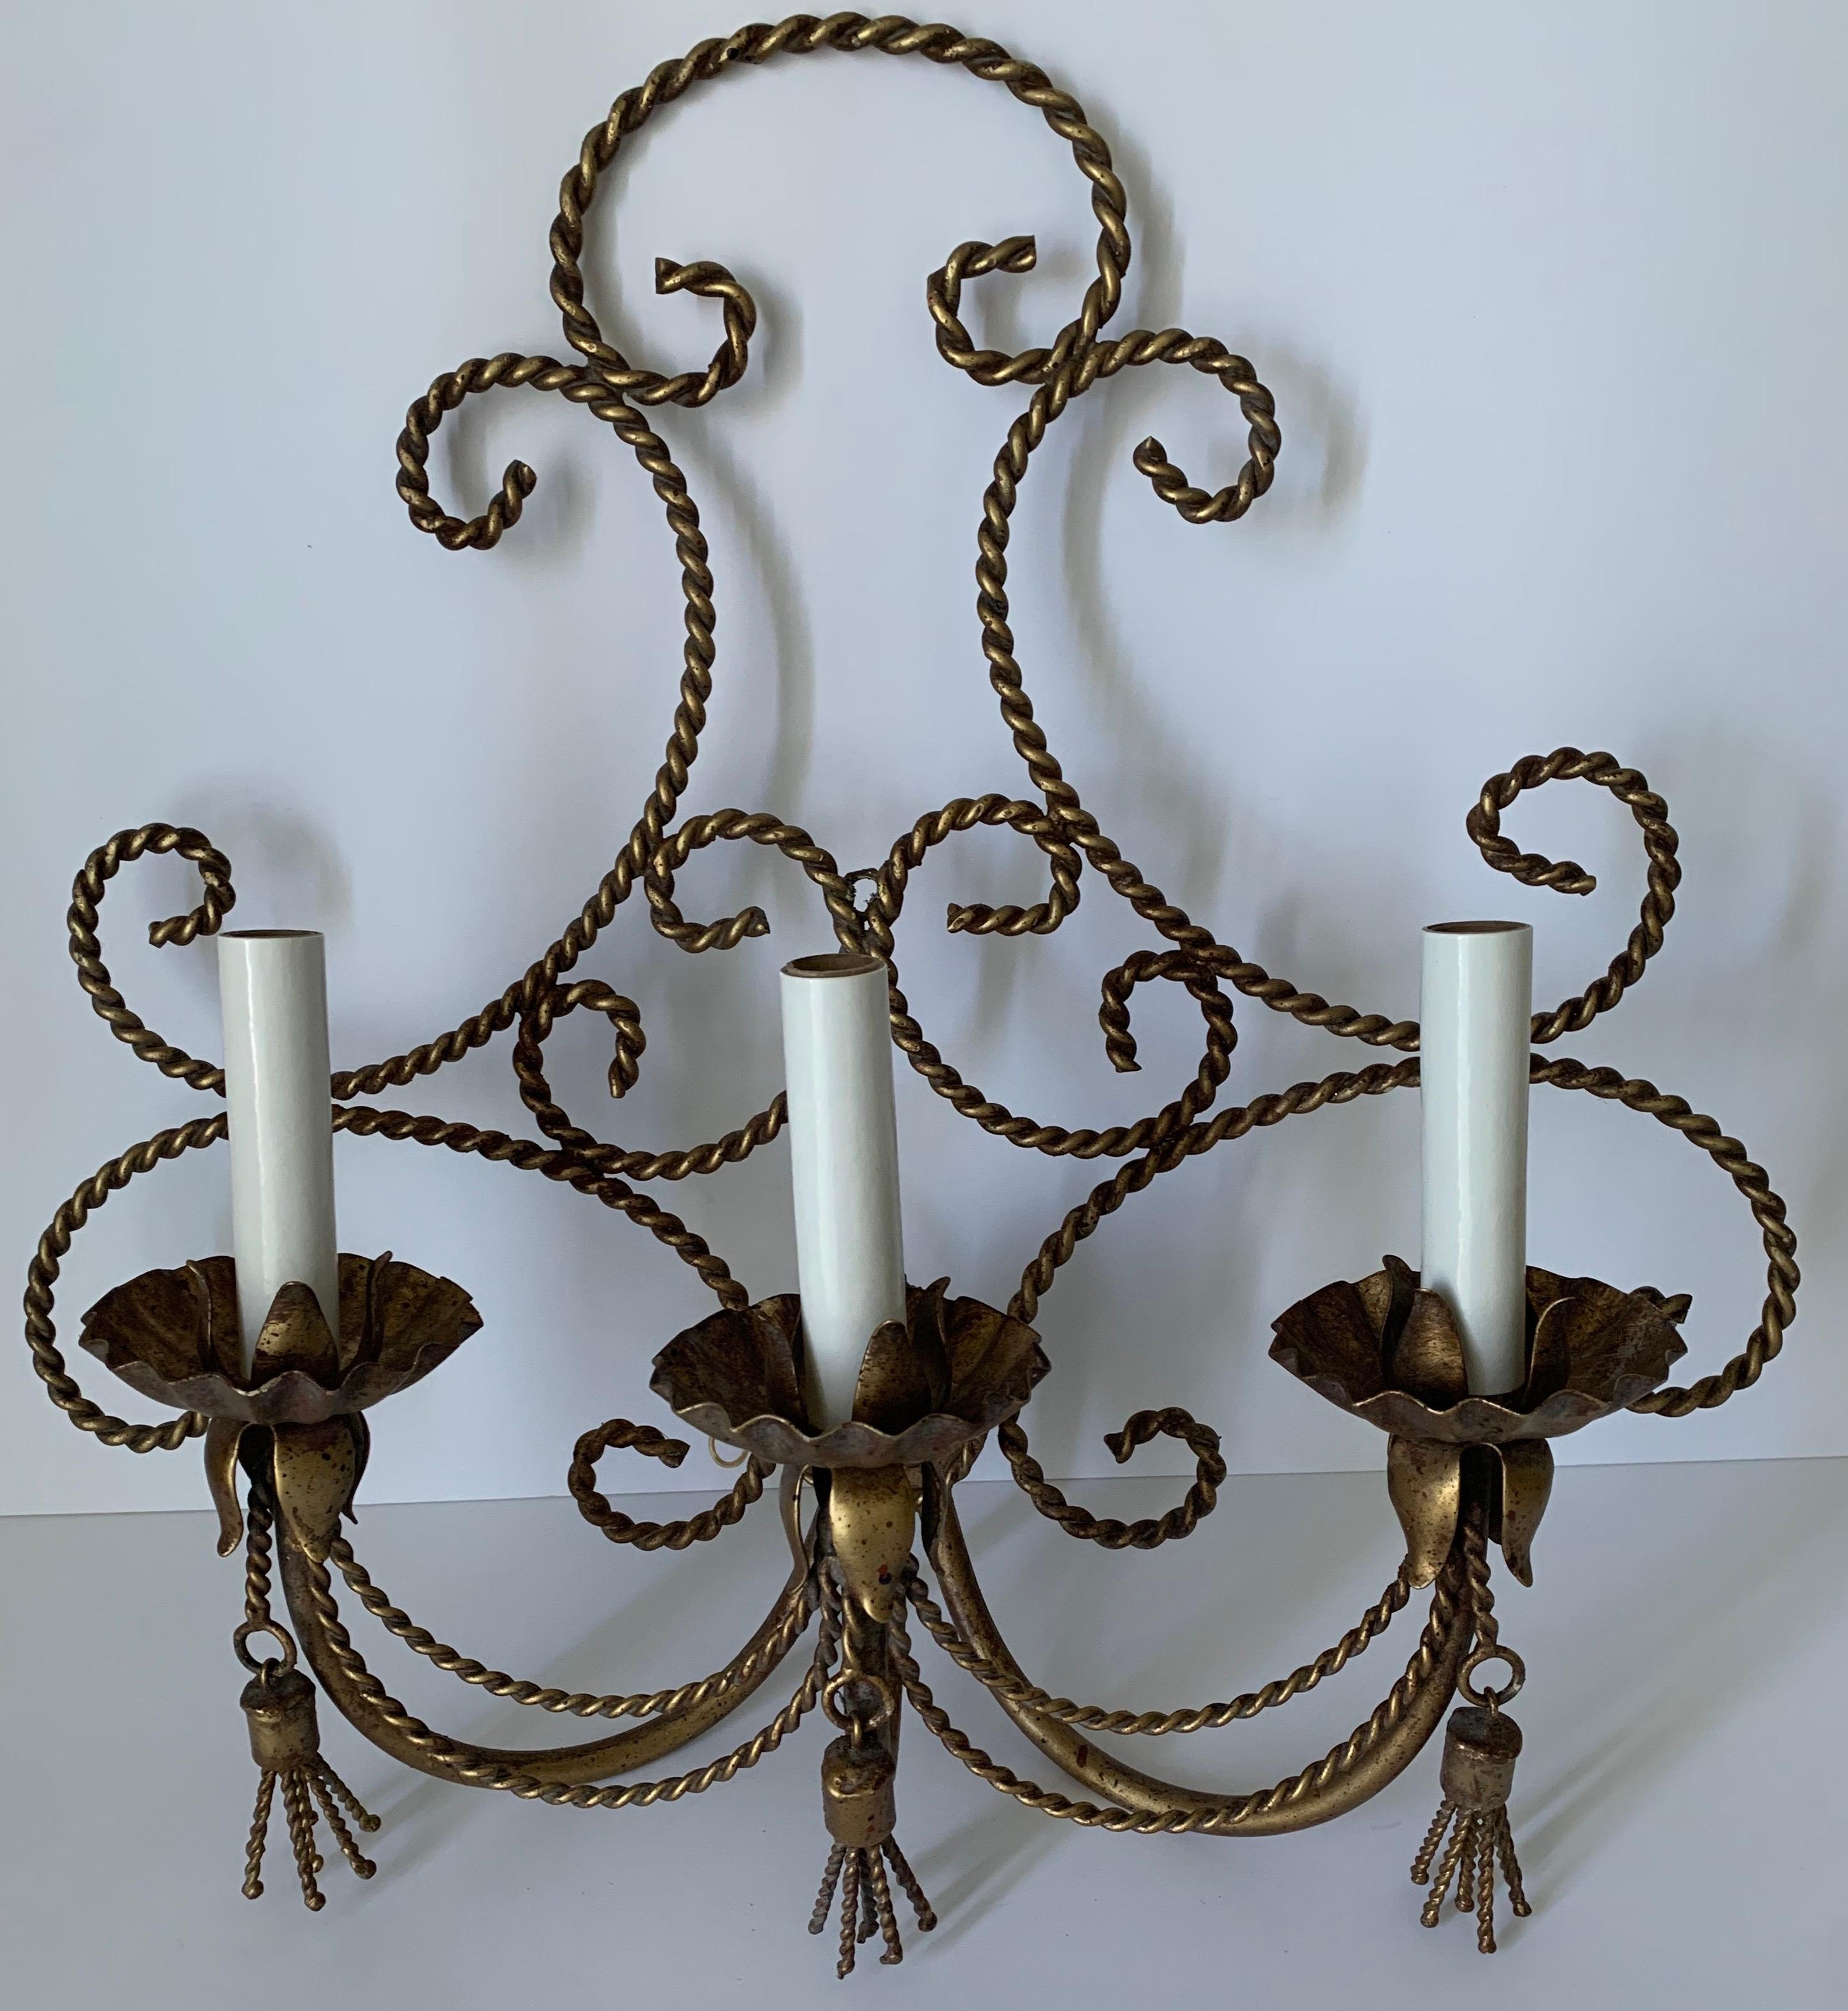 Pair of Hollywood Regency Italian gilt rope and tassel scones. Gilt painted metal with tassel detailing and flower center medallion. Newly rewired. Each light takes three chandelier bulbs (not included).

Please note that additional components such